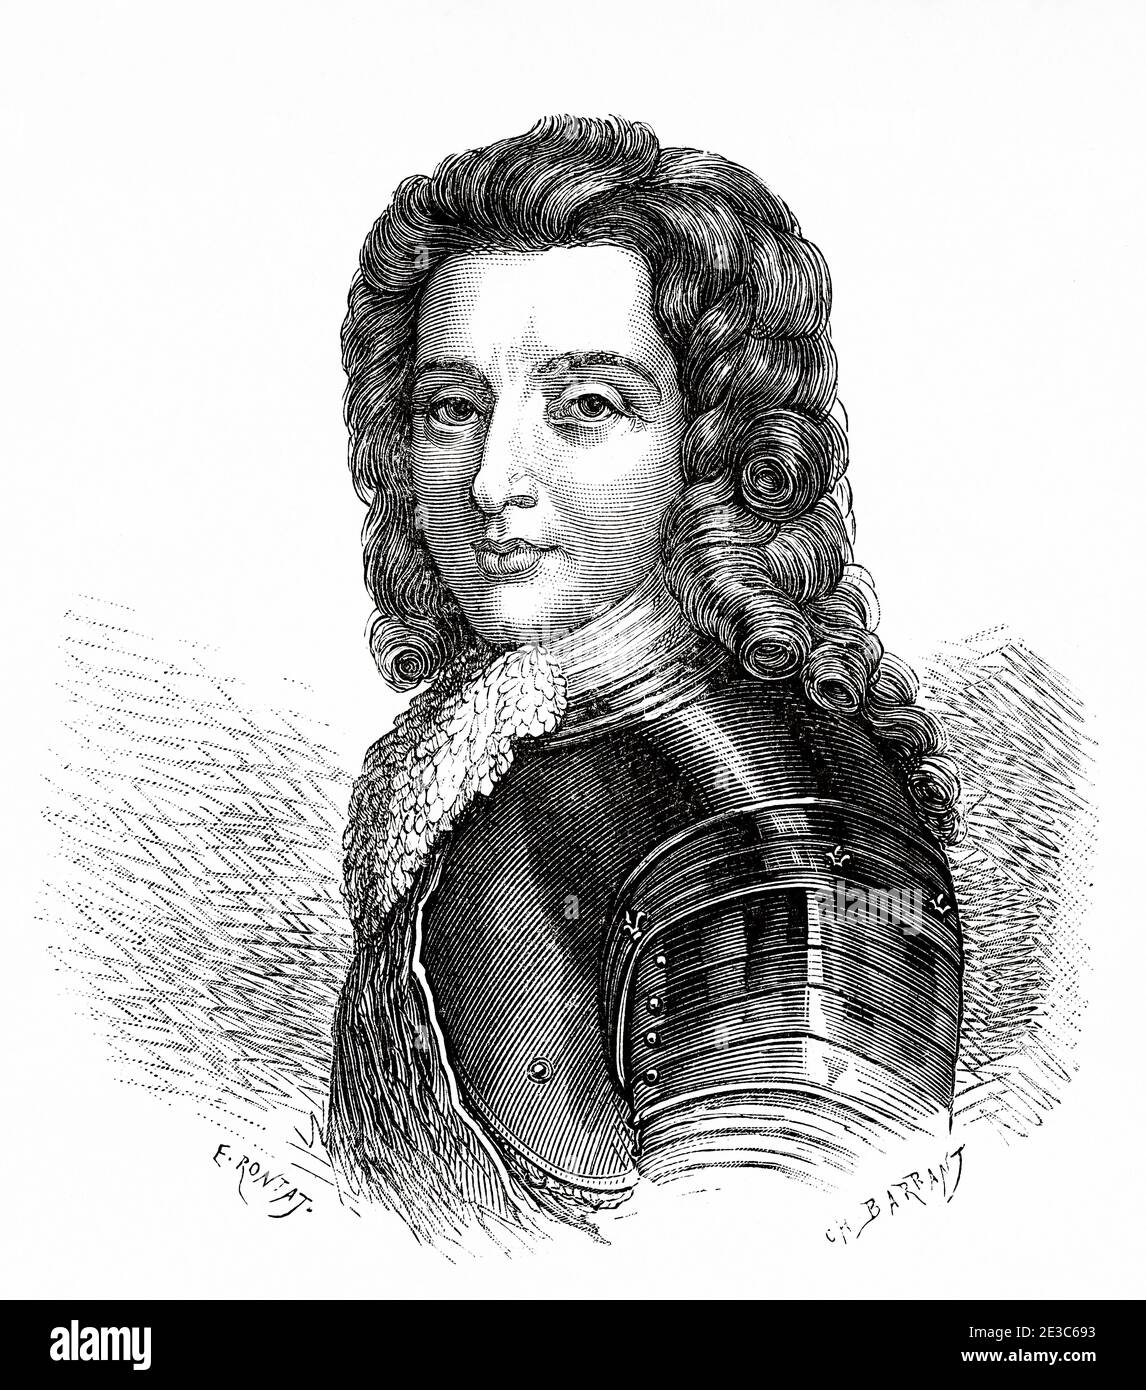 Louis-Auguste de Bourbon, duc du Maine (1670-1736), Duke of Maine, Duke of Aumale, sovereign prince of Dombes and count of Eu, was the first of the illegitimate children born of the relationship between the French king Louis XIV and his official mistress Madame de Montespan. France. Old XIX century engraving illustration. Les Français Illustres by Gustave Demoulin 1897 Stock Photo